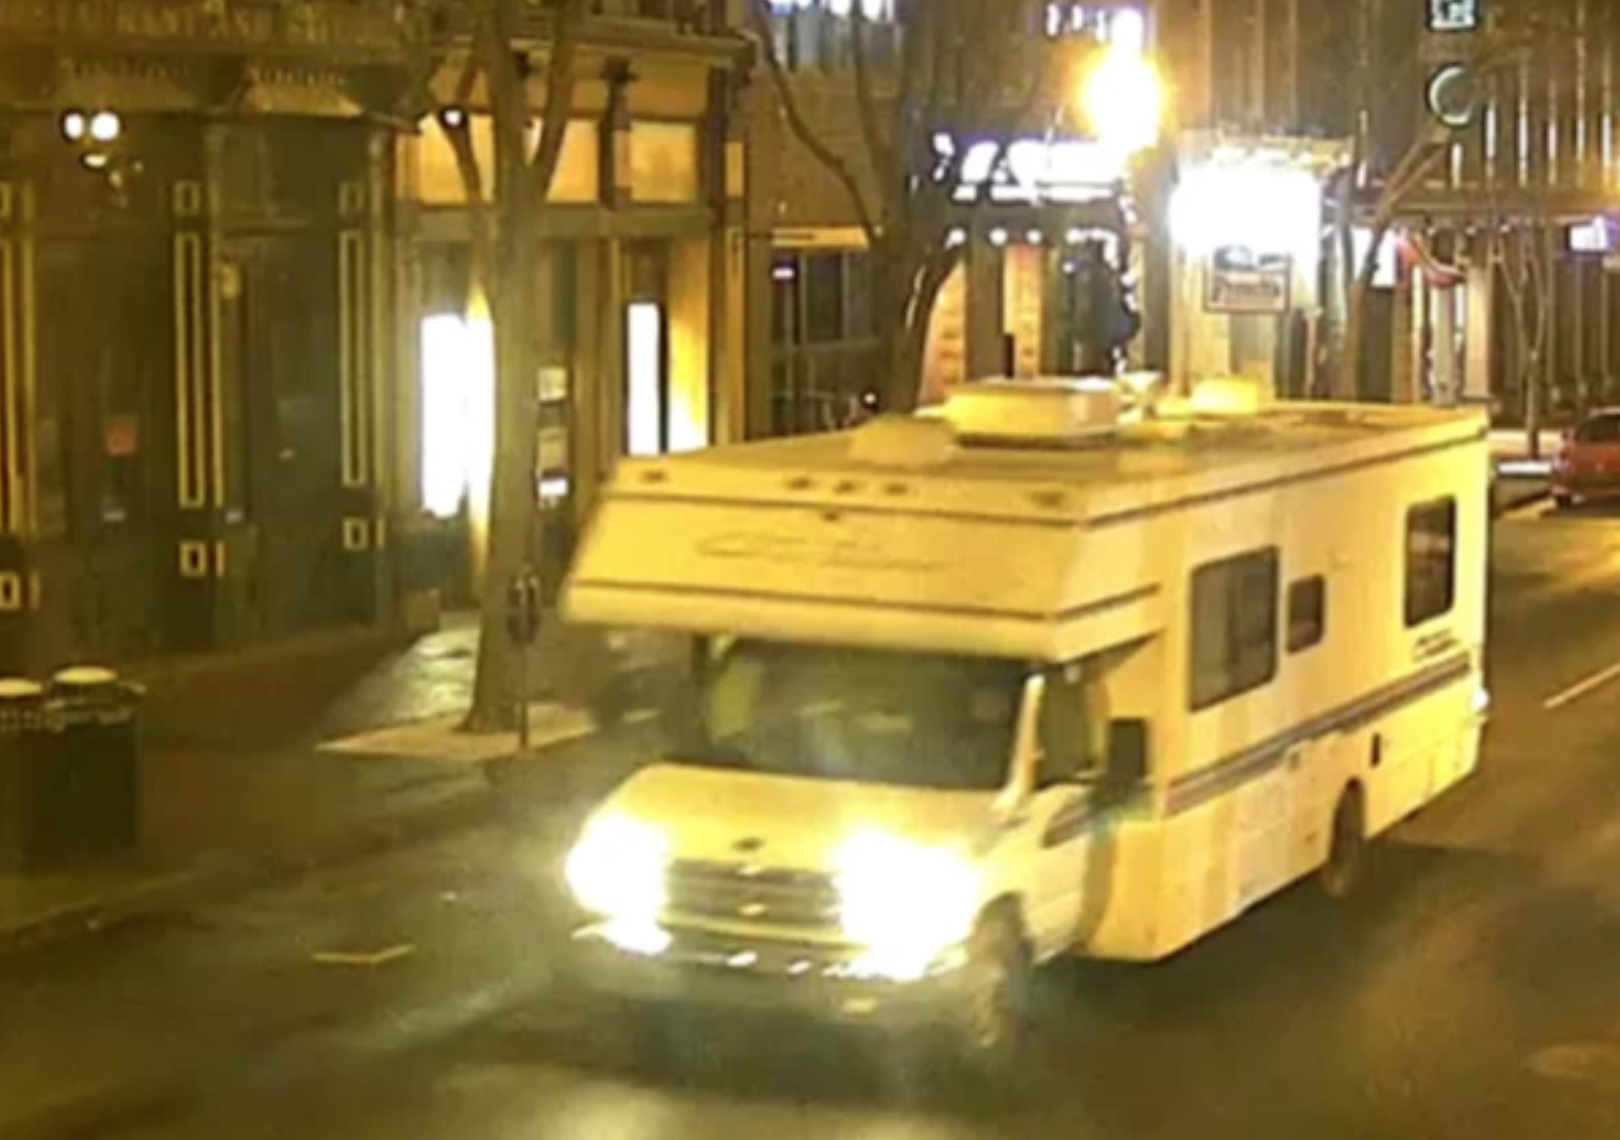 Anthony Warner's RV in downtown Nashville seen on security cameras